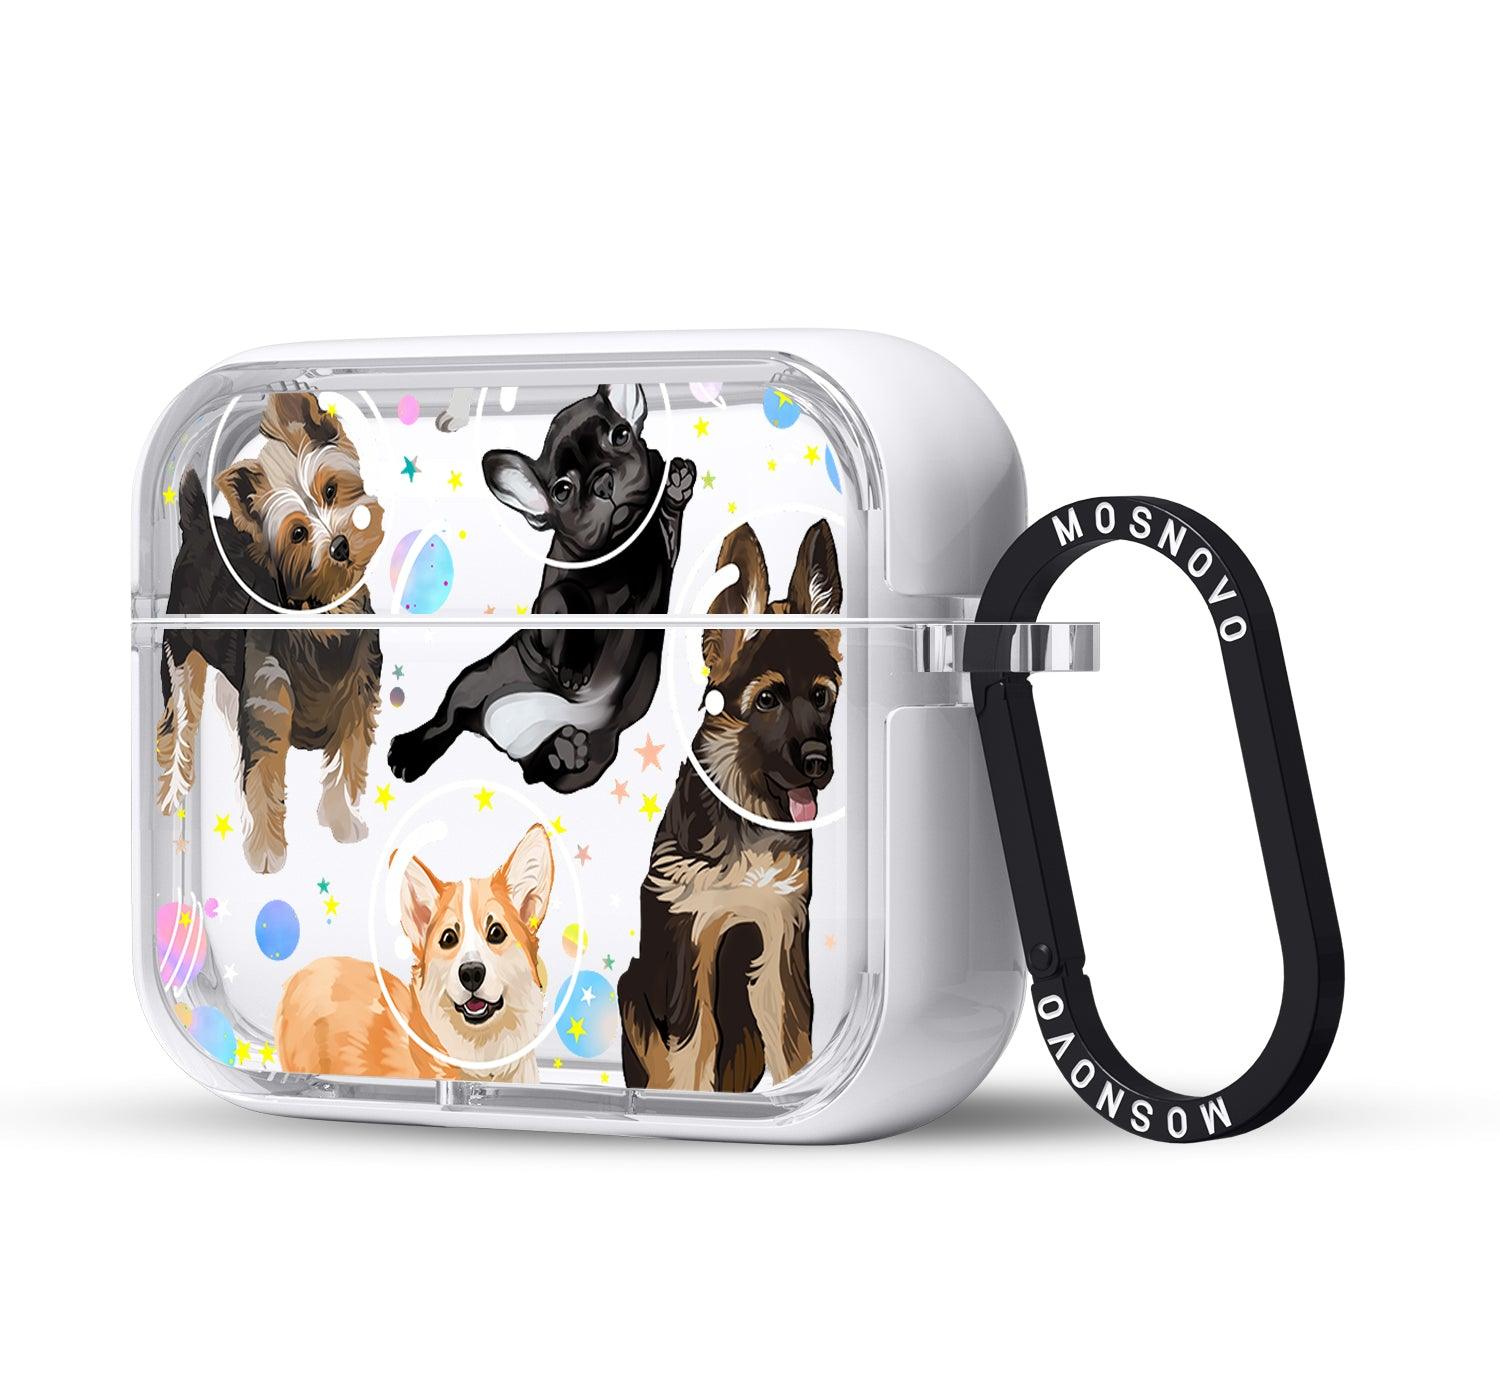 Space Dog AirPods Pro 2 Case (2nd Generation) - MOSNOVO